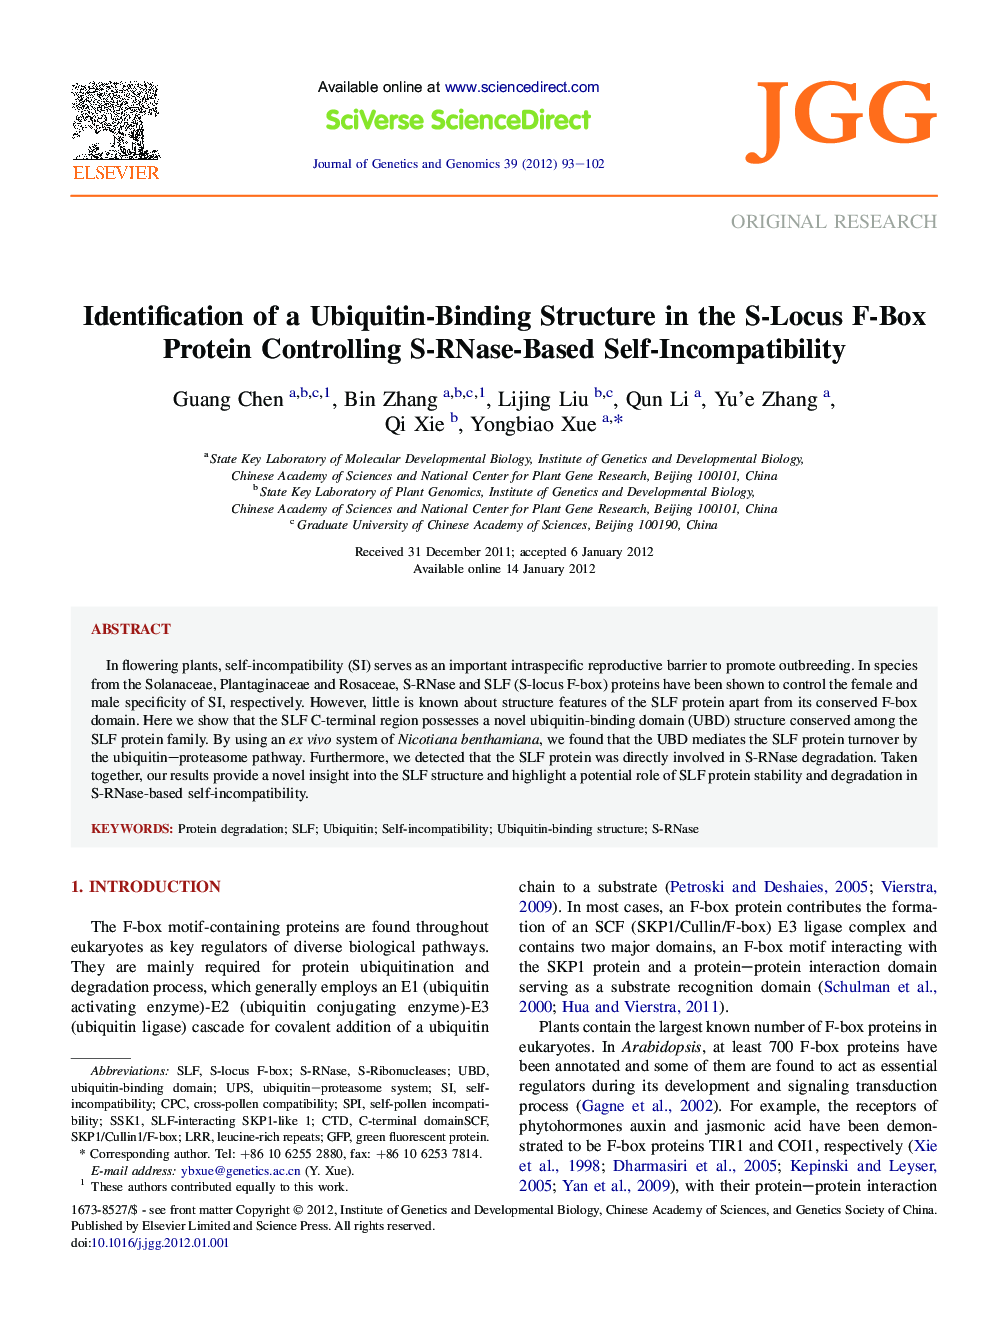 Identification of a Ubiquitin-Binding Structure in the S-Locus F-Box Protein Controlling S-RNase-Based Self-Incompatibility